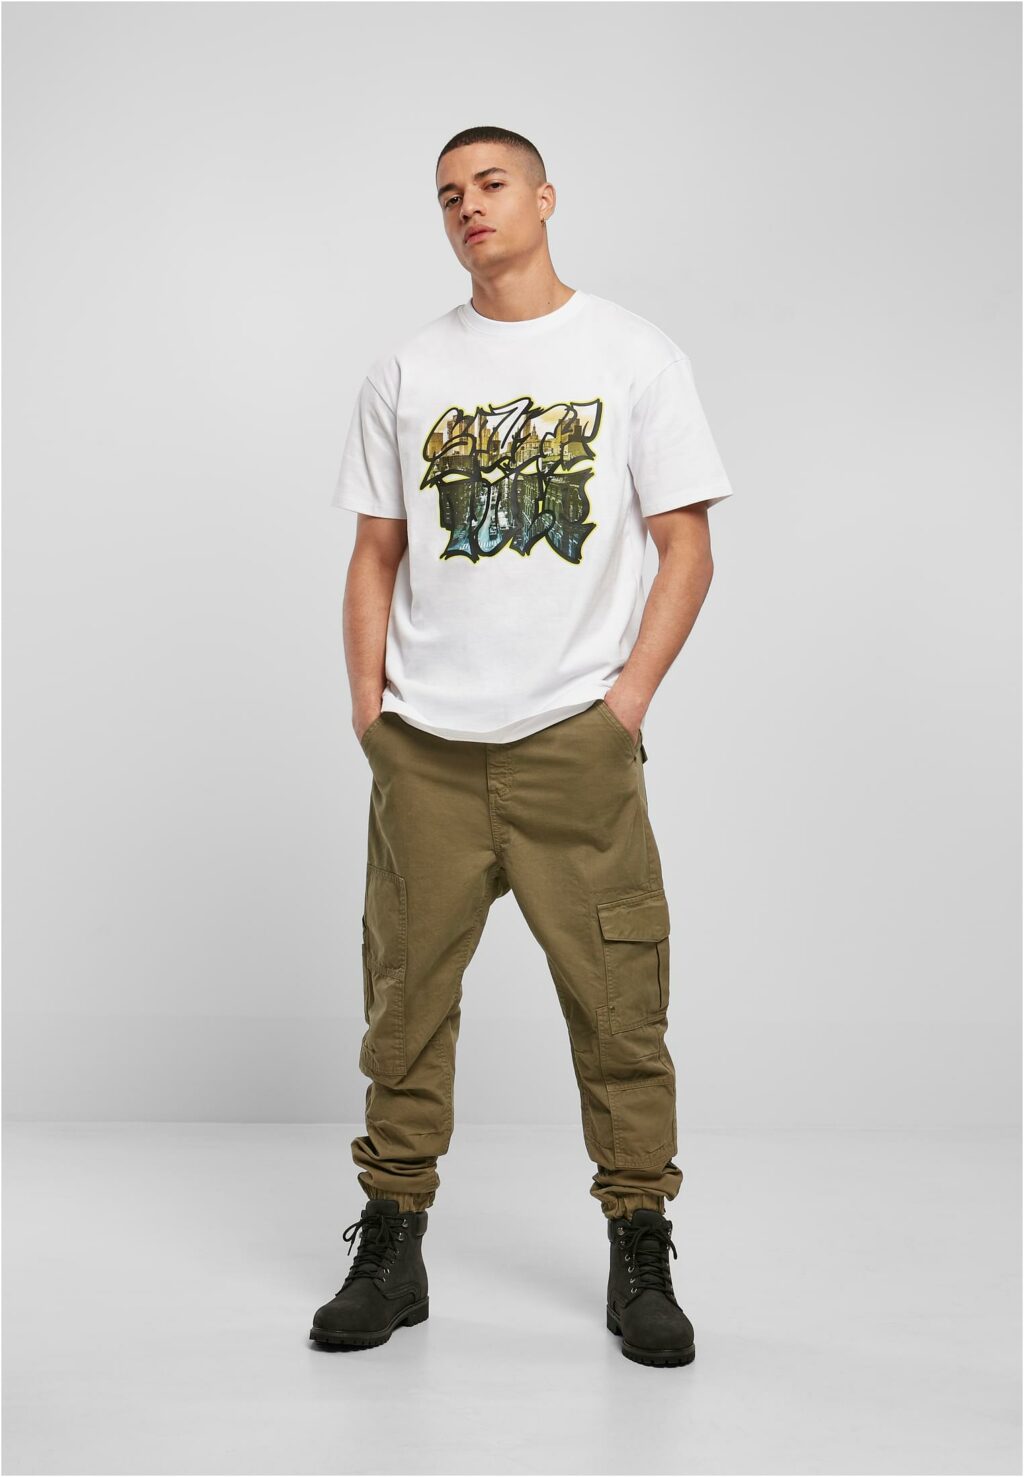 Southpole Graphic Tee white SP240